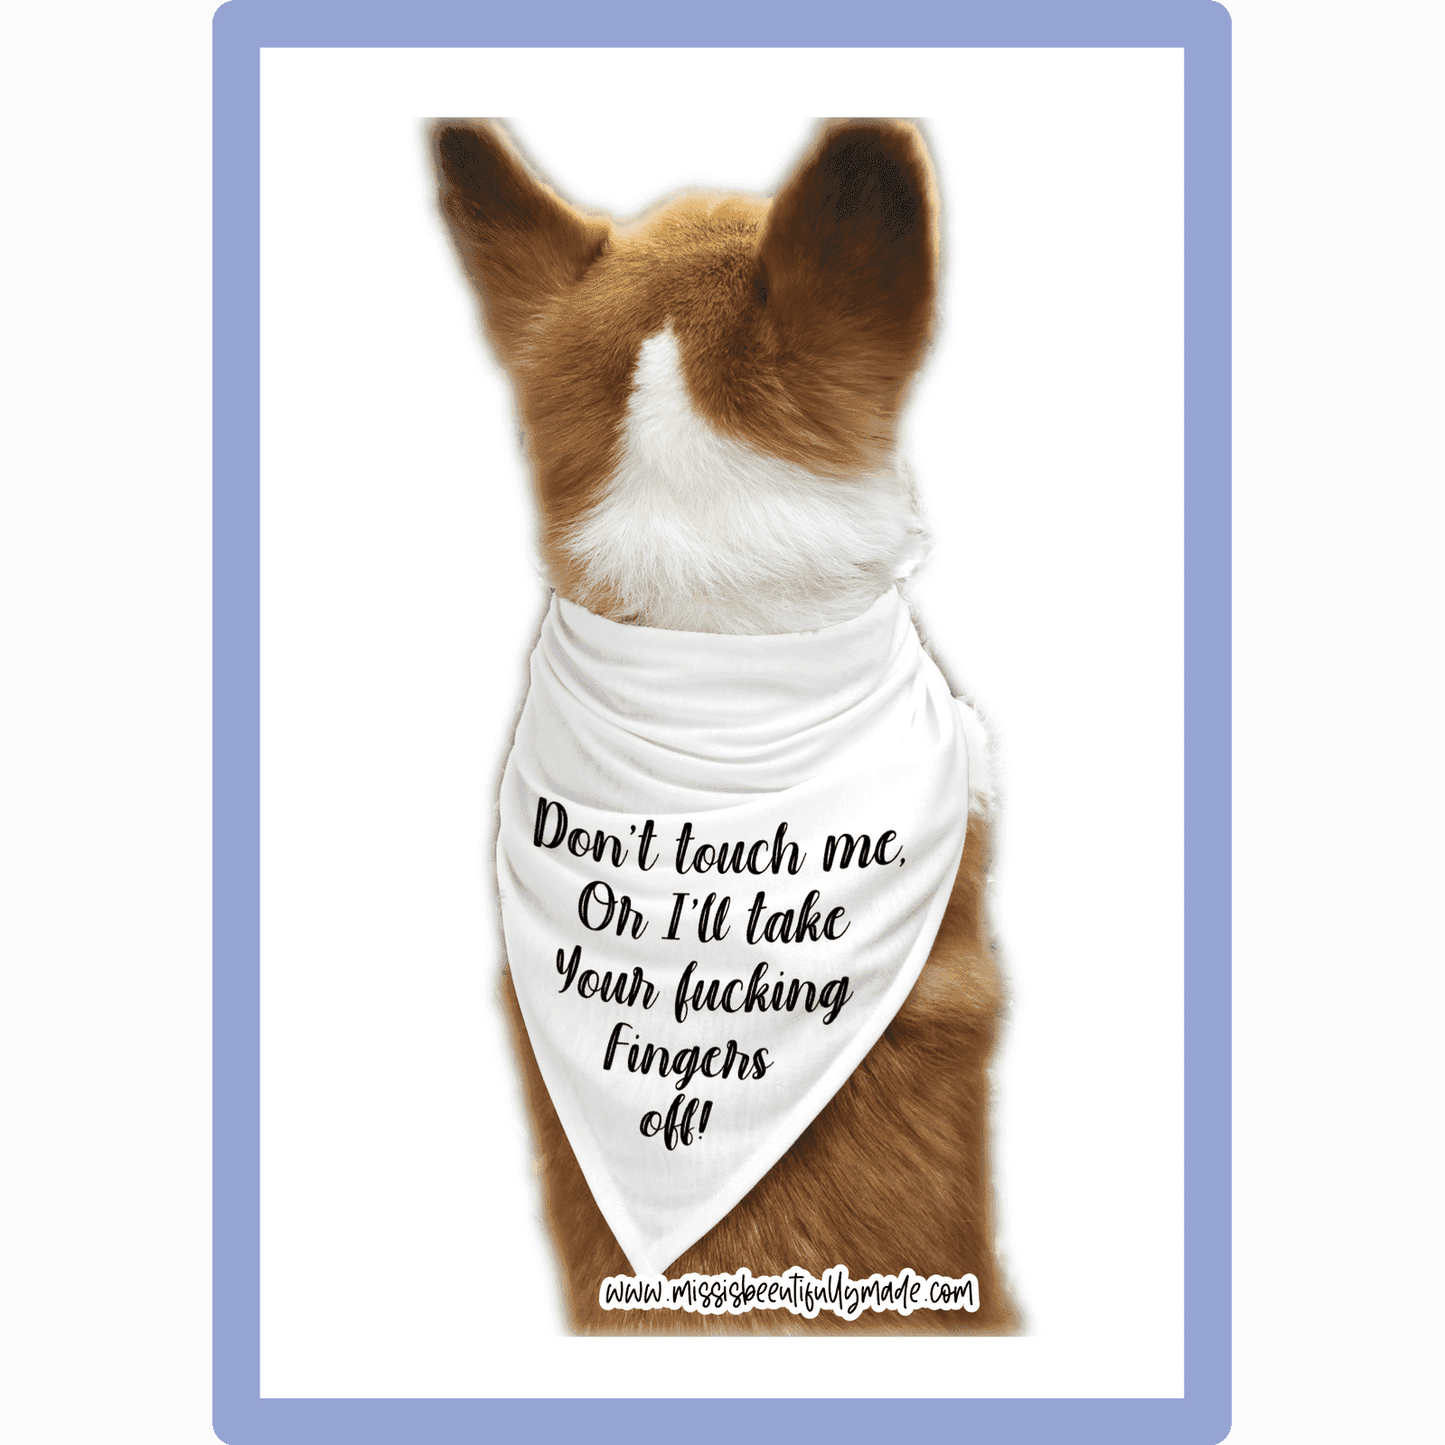 Dog bandana - Don’t touch me or I’ll take your fucking fingers off